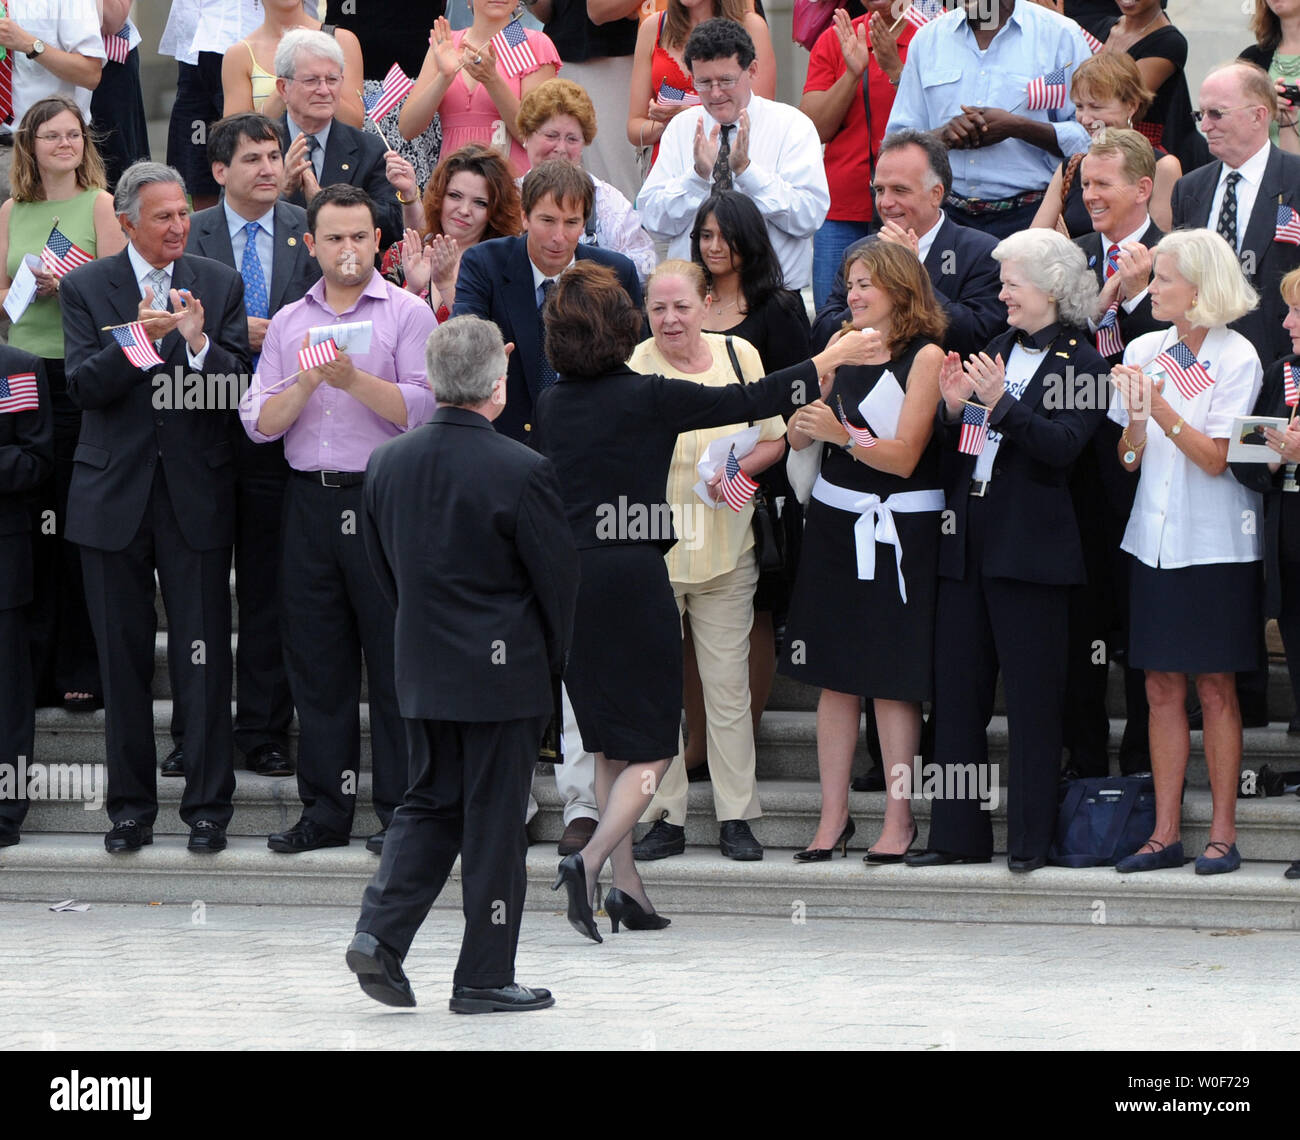 Vicki Kennedy, widow of Senator Edward Kennedy, walks up to greet members of Congress and former and current staff members of the Senator, as Reverend Daniel P. Coughlin, Chaplain of the U.S. House of Representatives, (L) stands by, outside the U.S. Capitol building in Washington on August 29, 2009. Senator Kennedy, who passed away August 25 at the age of 77, will be buried  today at Arlington National Cemetery. UPI/Alexis C. Glenn Stock Photo